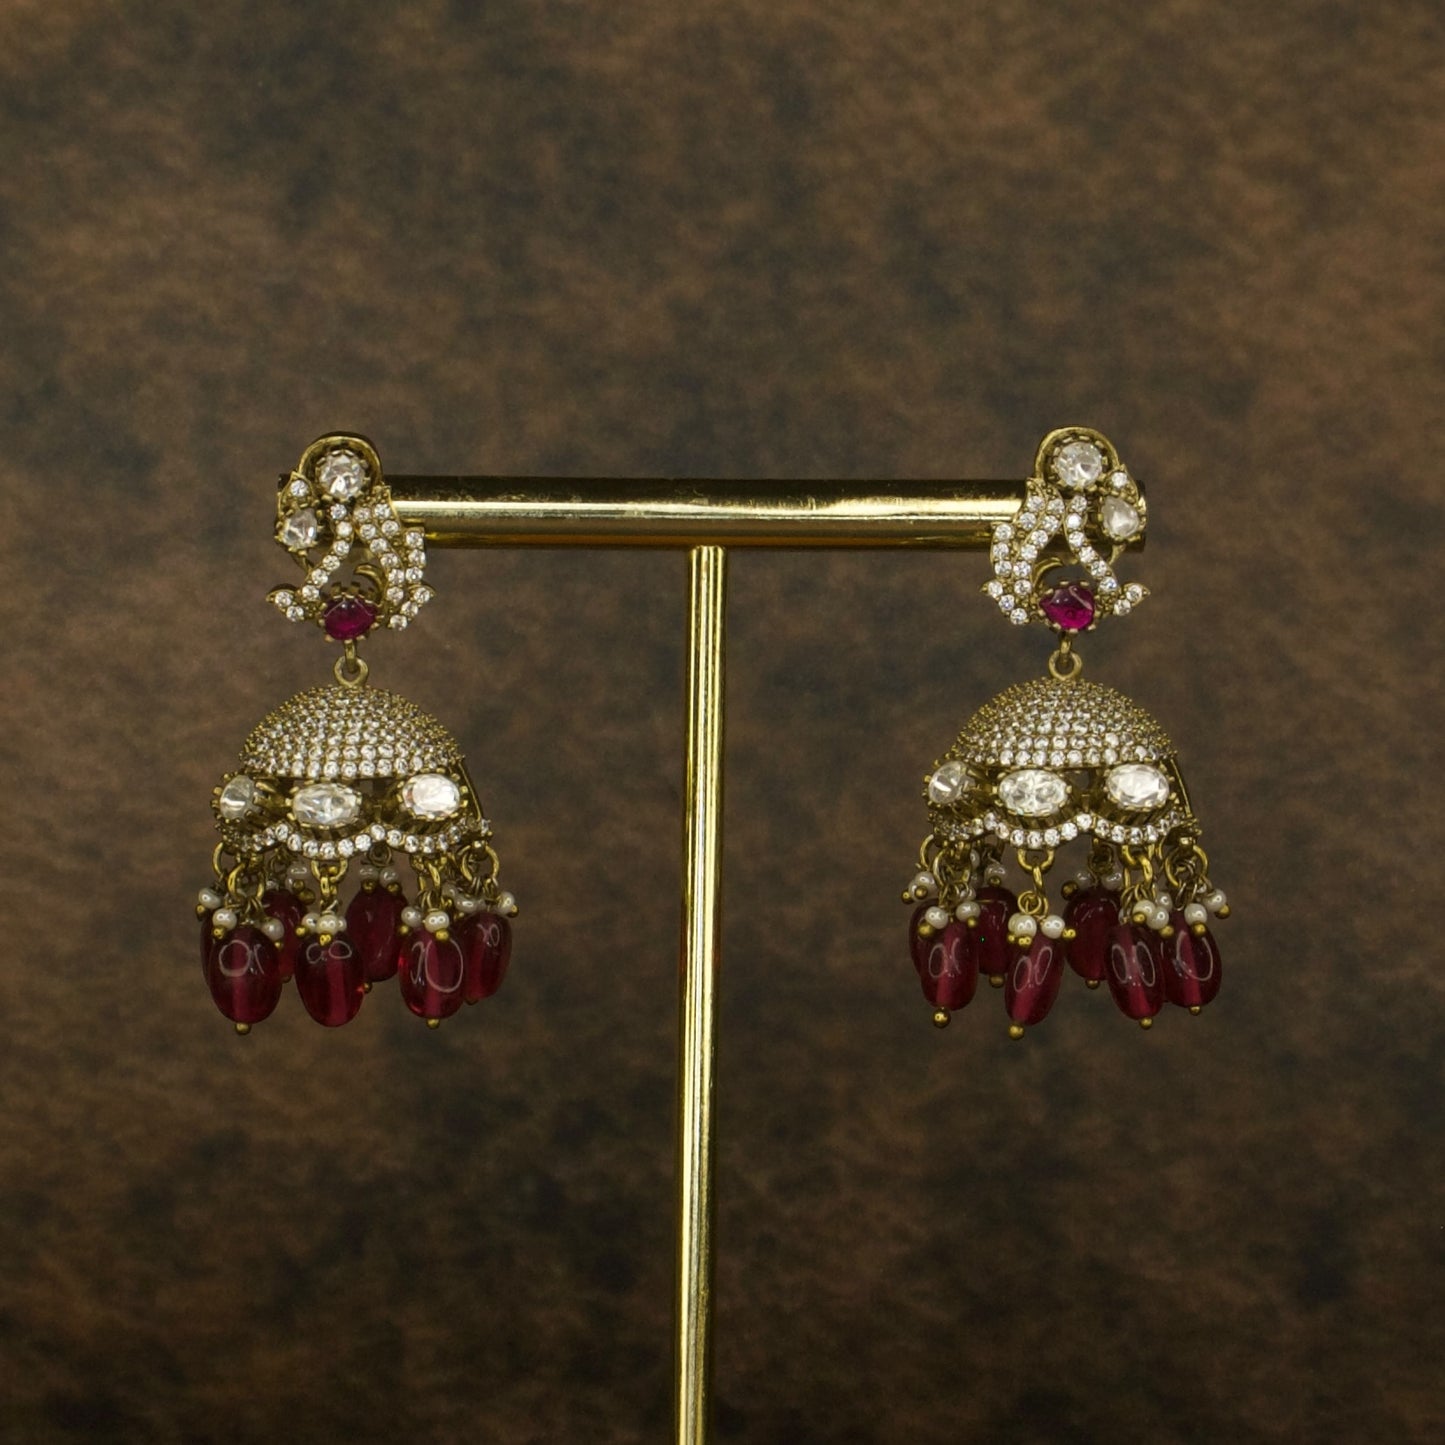 Victorian Charm Jhumka Earrings with CZ and Kundan Stones WITH High Quality Victorian Finish . This Product Belongs to Victorian Jewellery Category